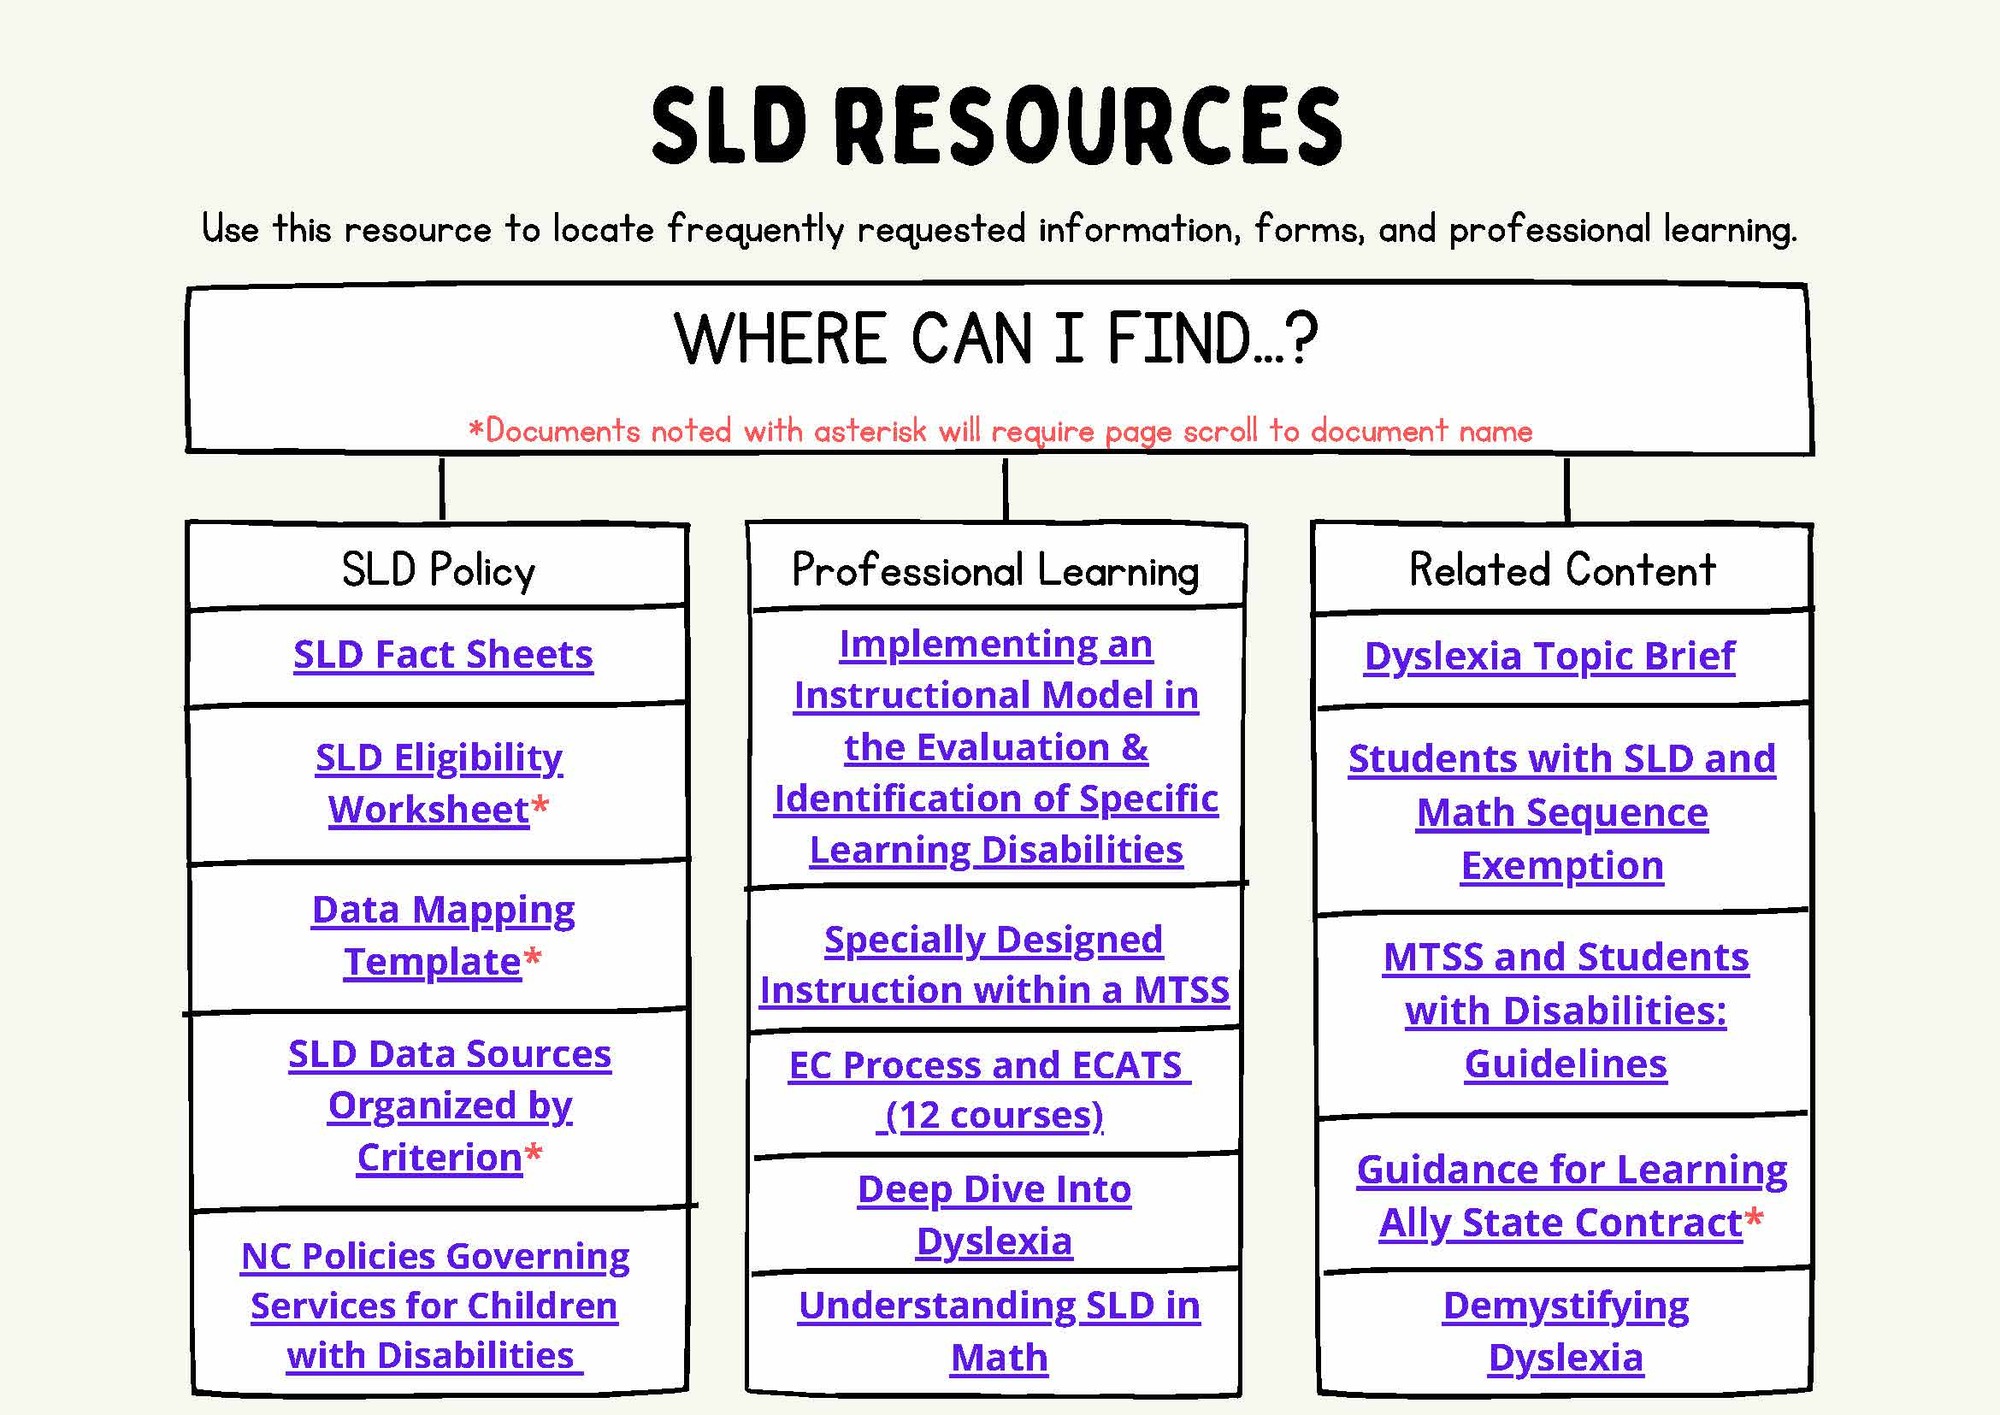 SLD Resources Reference (follow link to the full document)